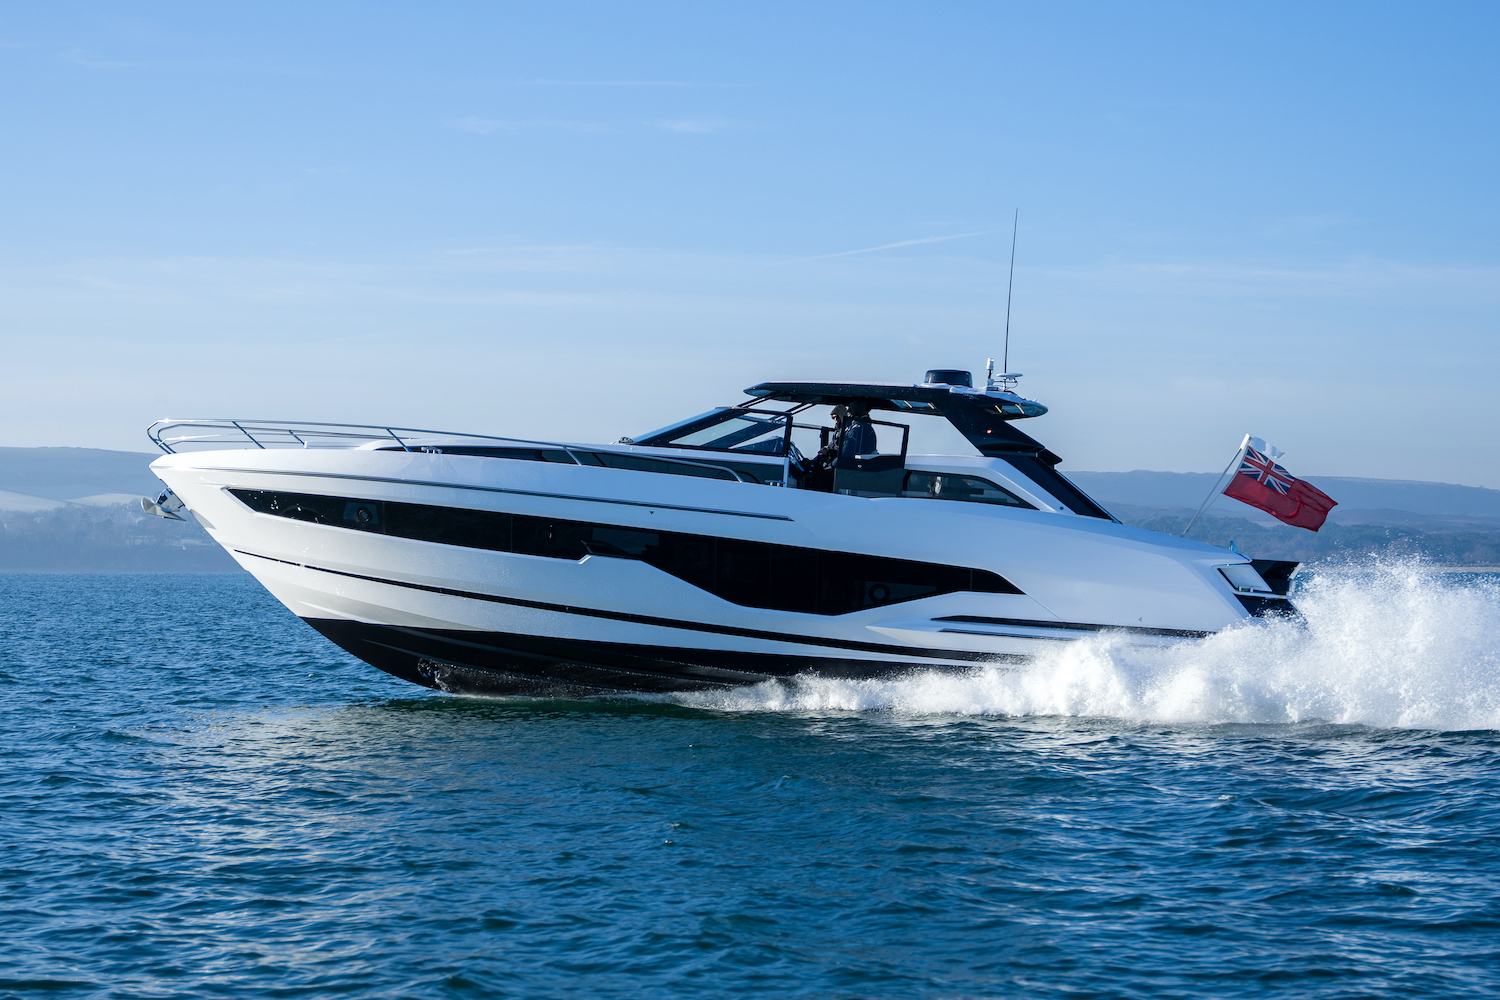 Sunseeker Superhawk 55 Makes US Debut at Miami Boat Show